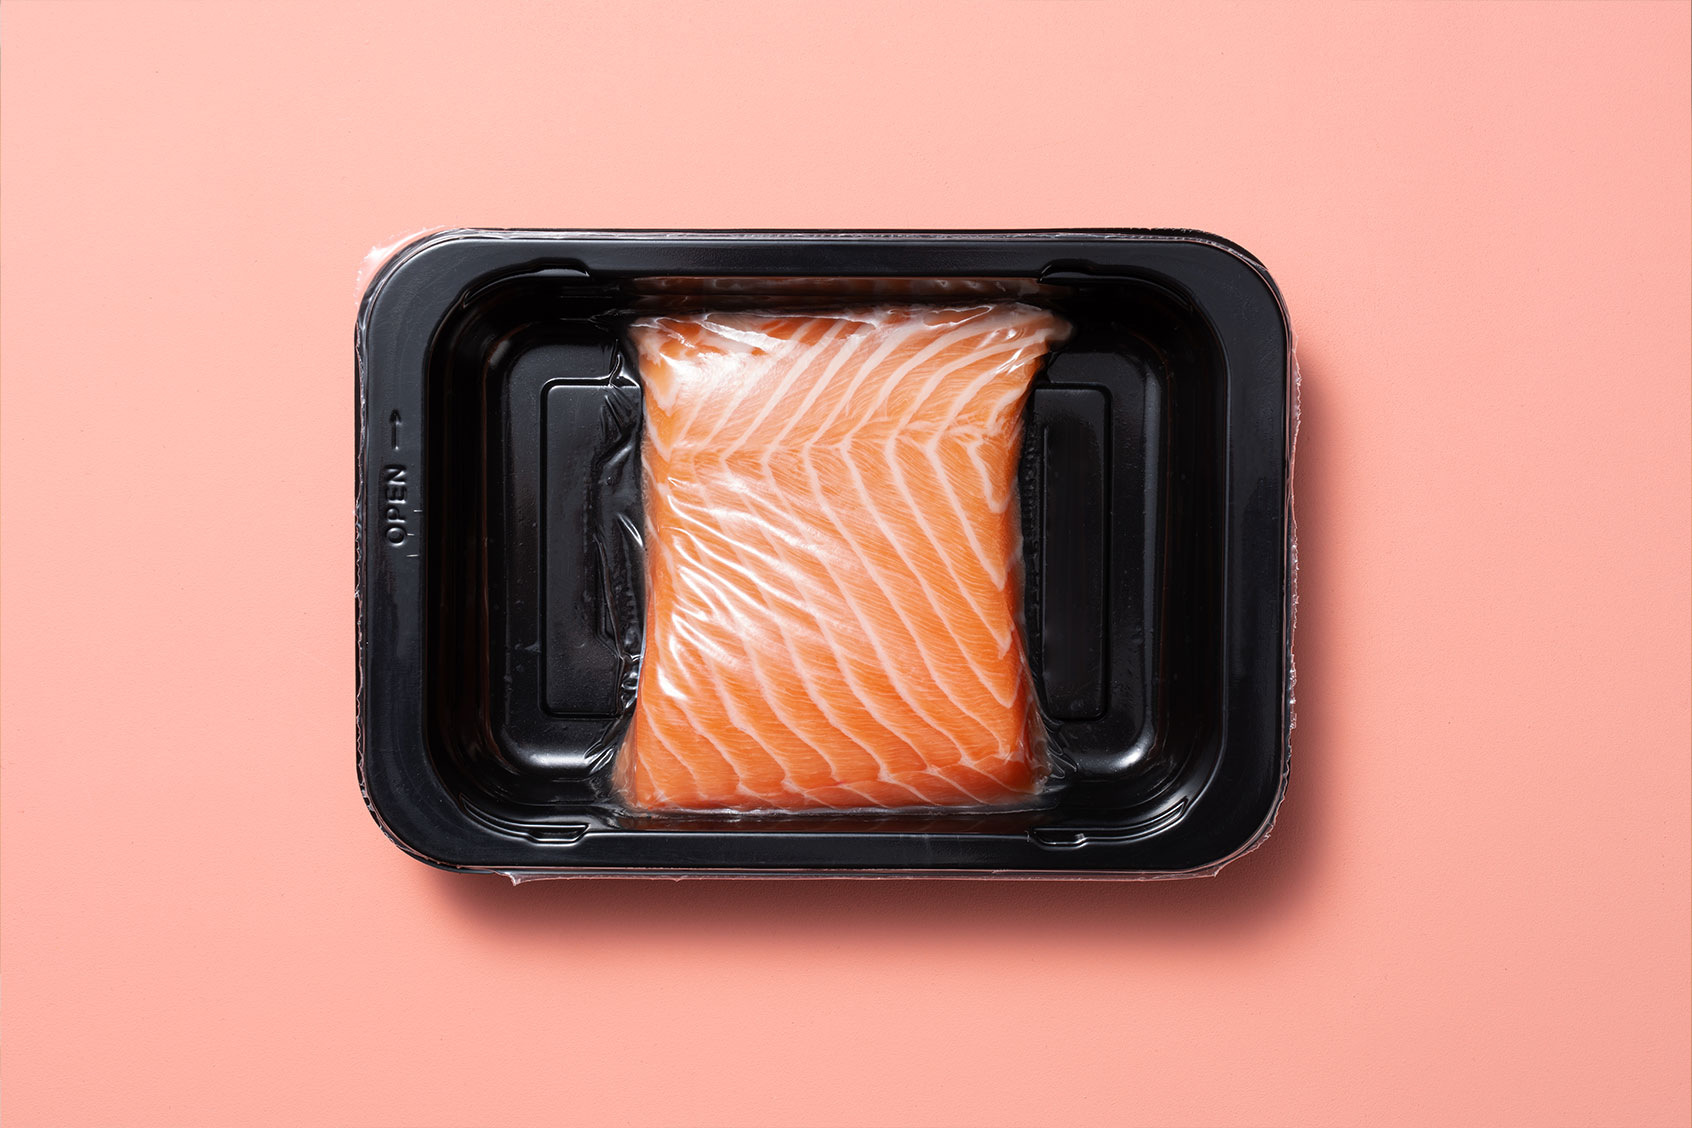 How to use your air fryer to make tender, perfectly-cooked salmon